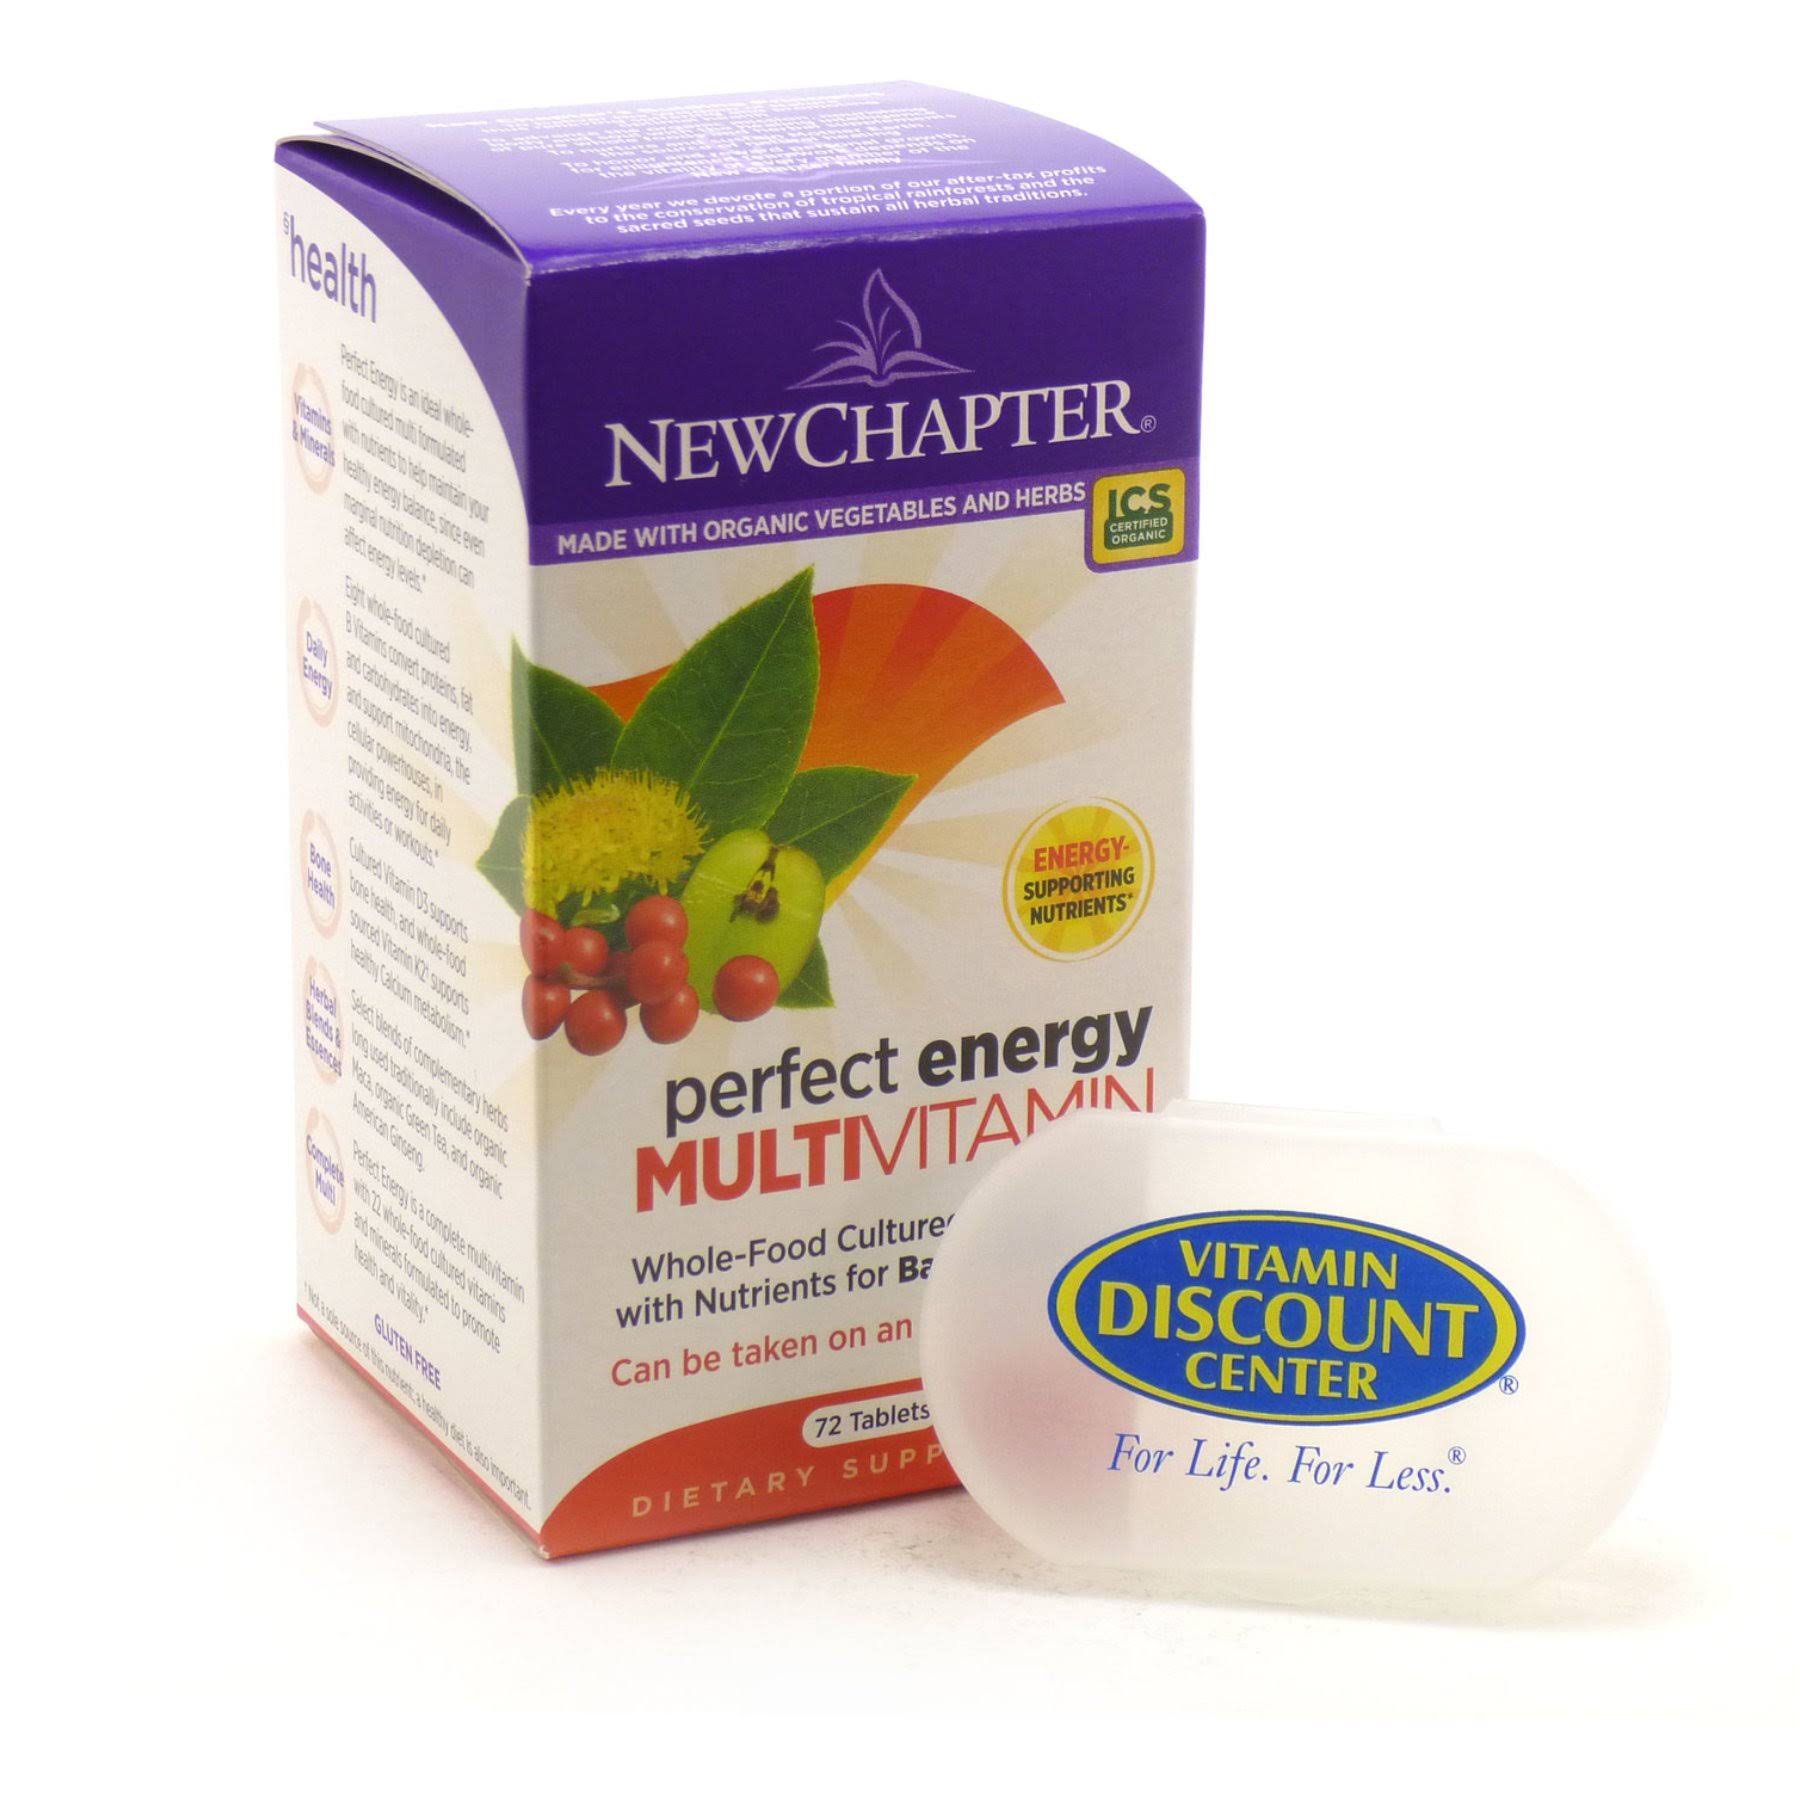 New Chapter Perfect Energy Multivitamin Supplement - 72 Tablets